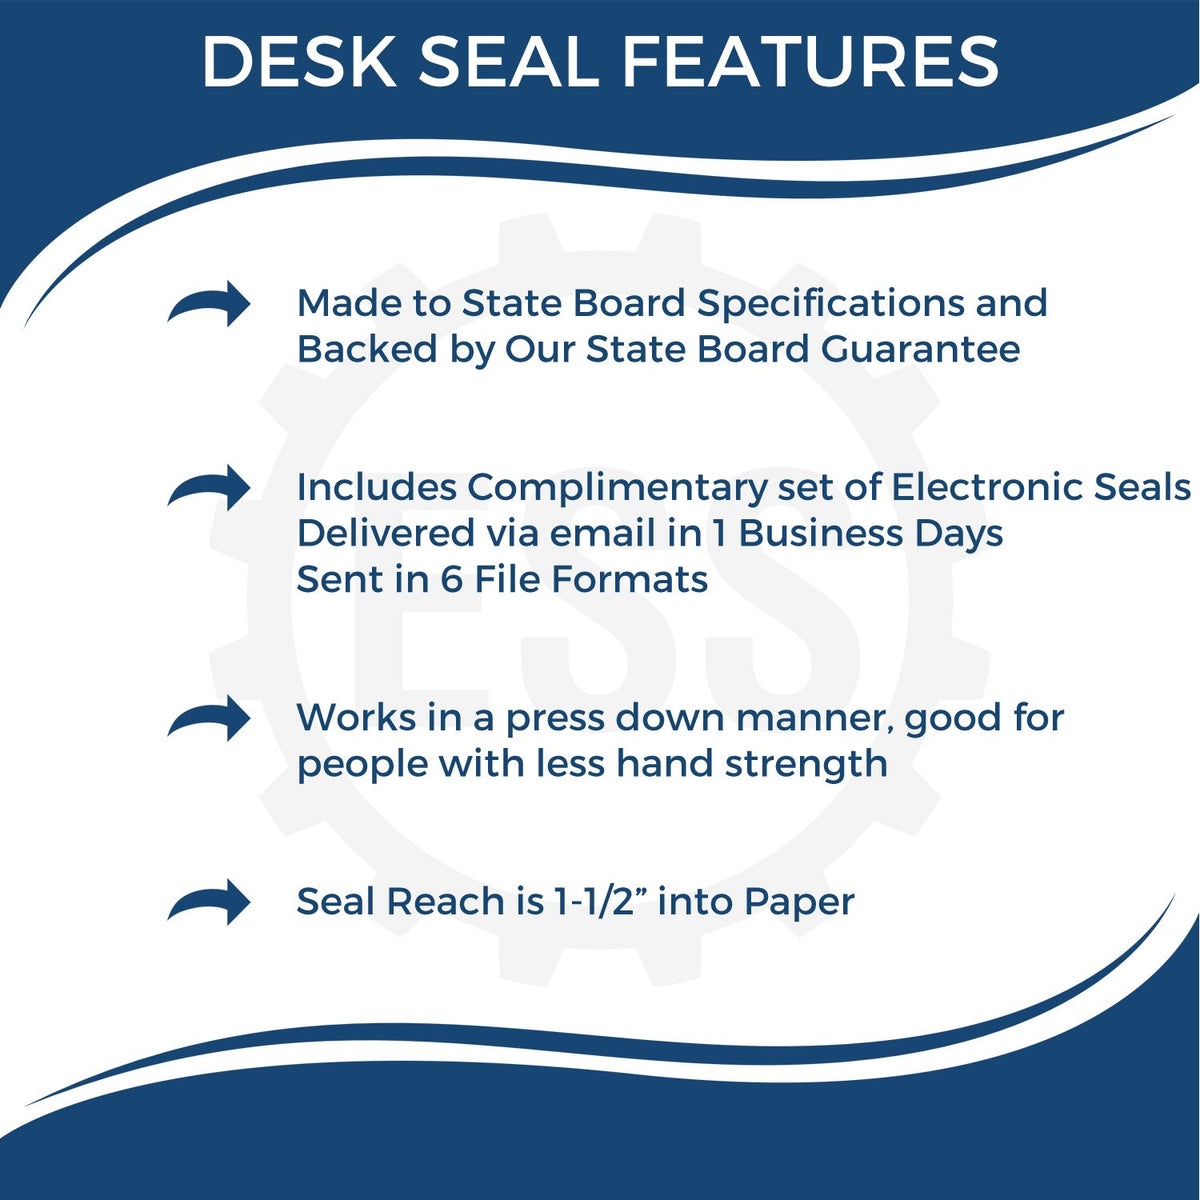 A picture of an infographic highlighting the selling points for the Delaware Engineer Desk Seal